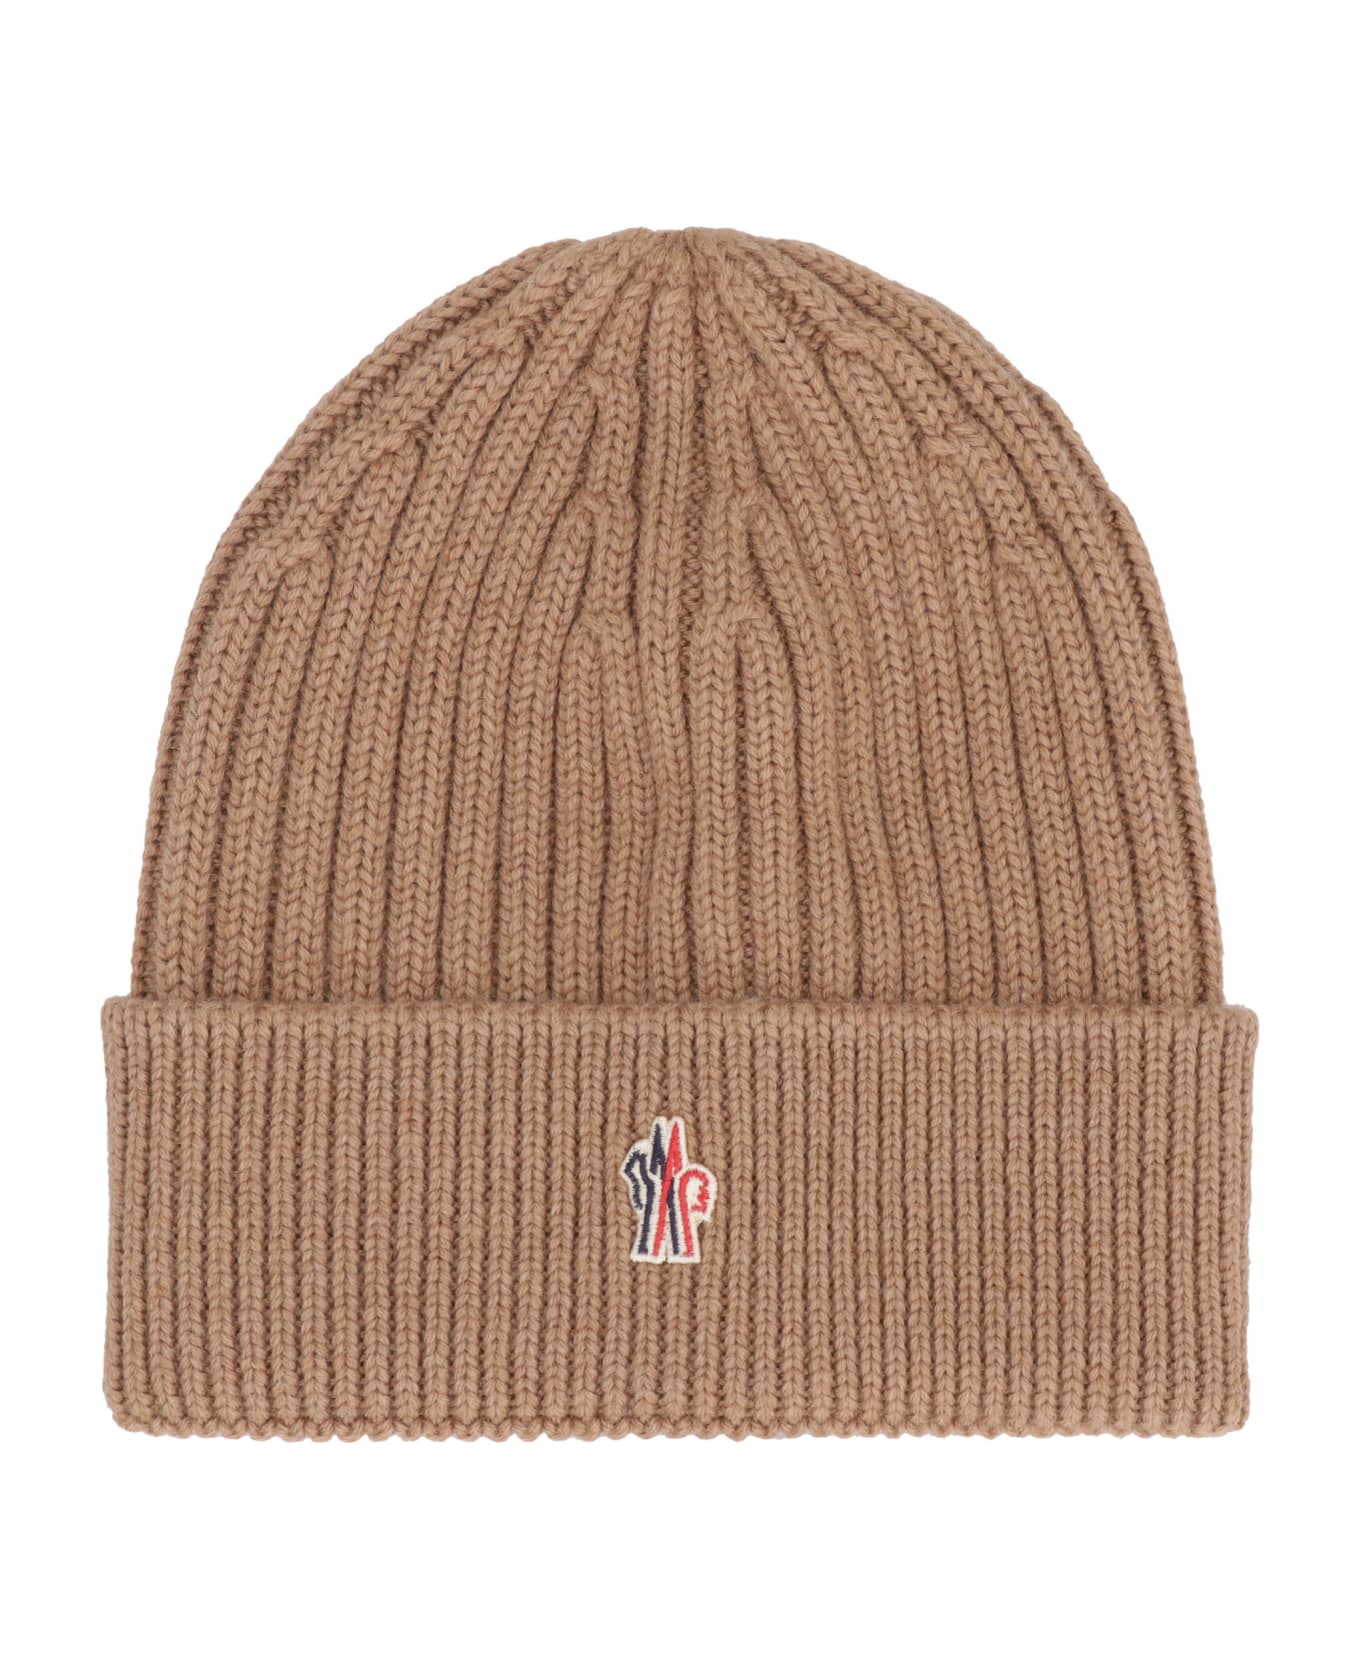 Moncler Grenoble Ribbed Knit Beanie - Camel